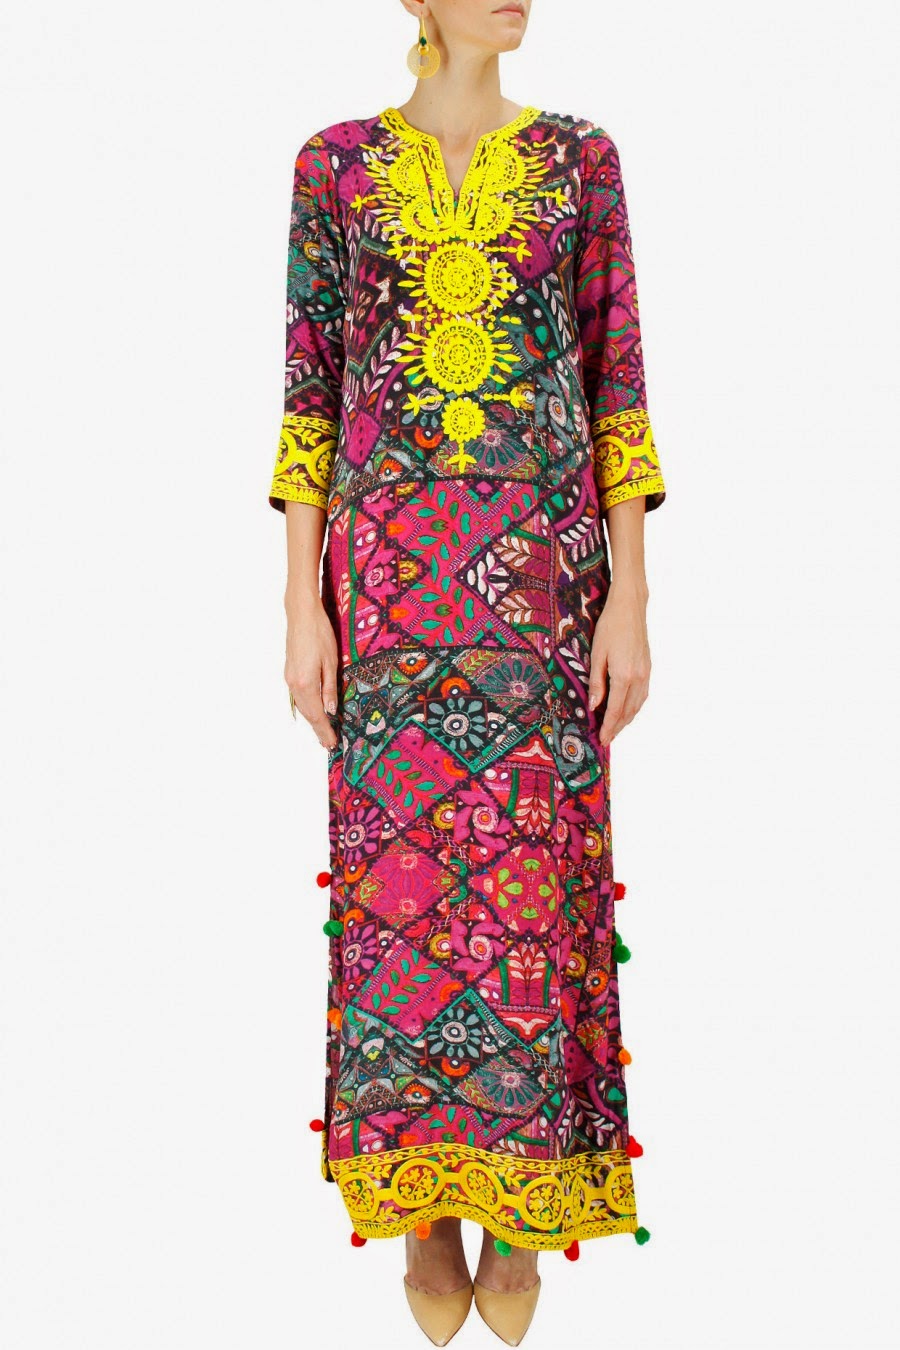 Gorgeous and Surrealistic Prints New Collection of Kaftans and Dresses ...